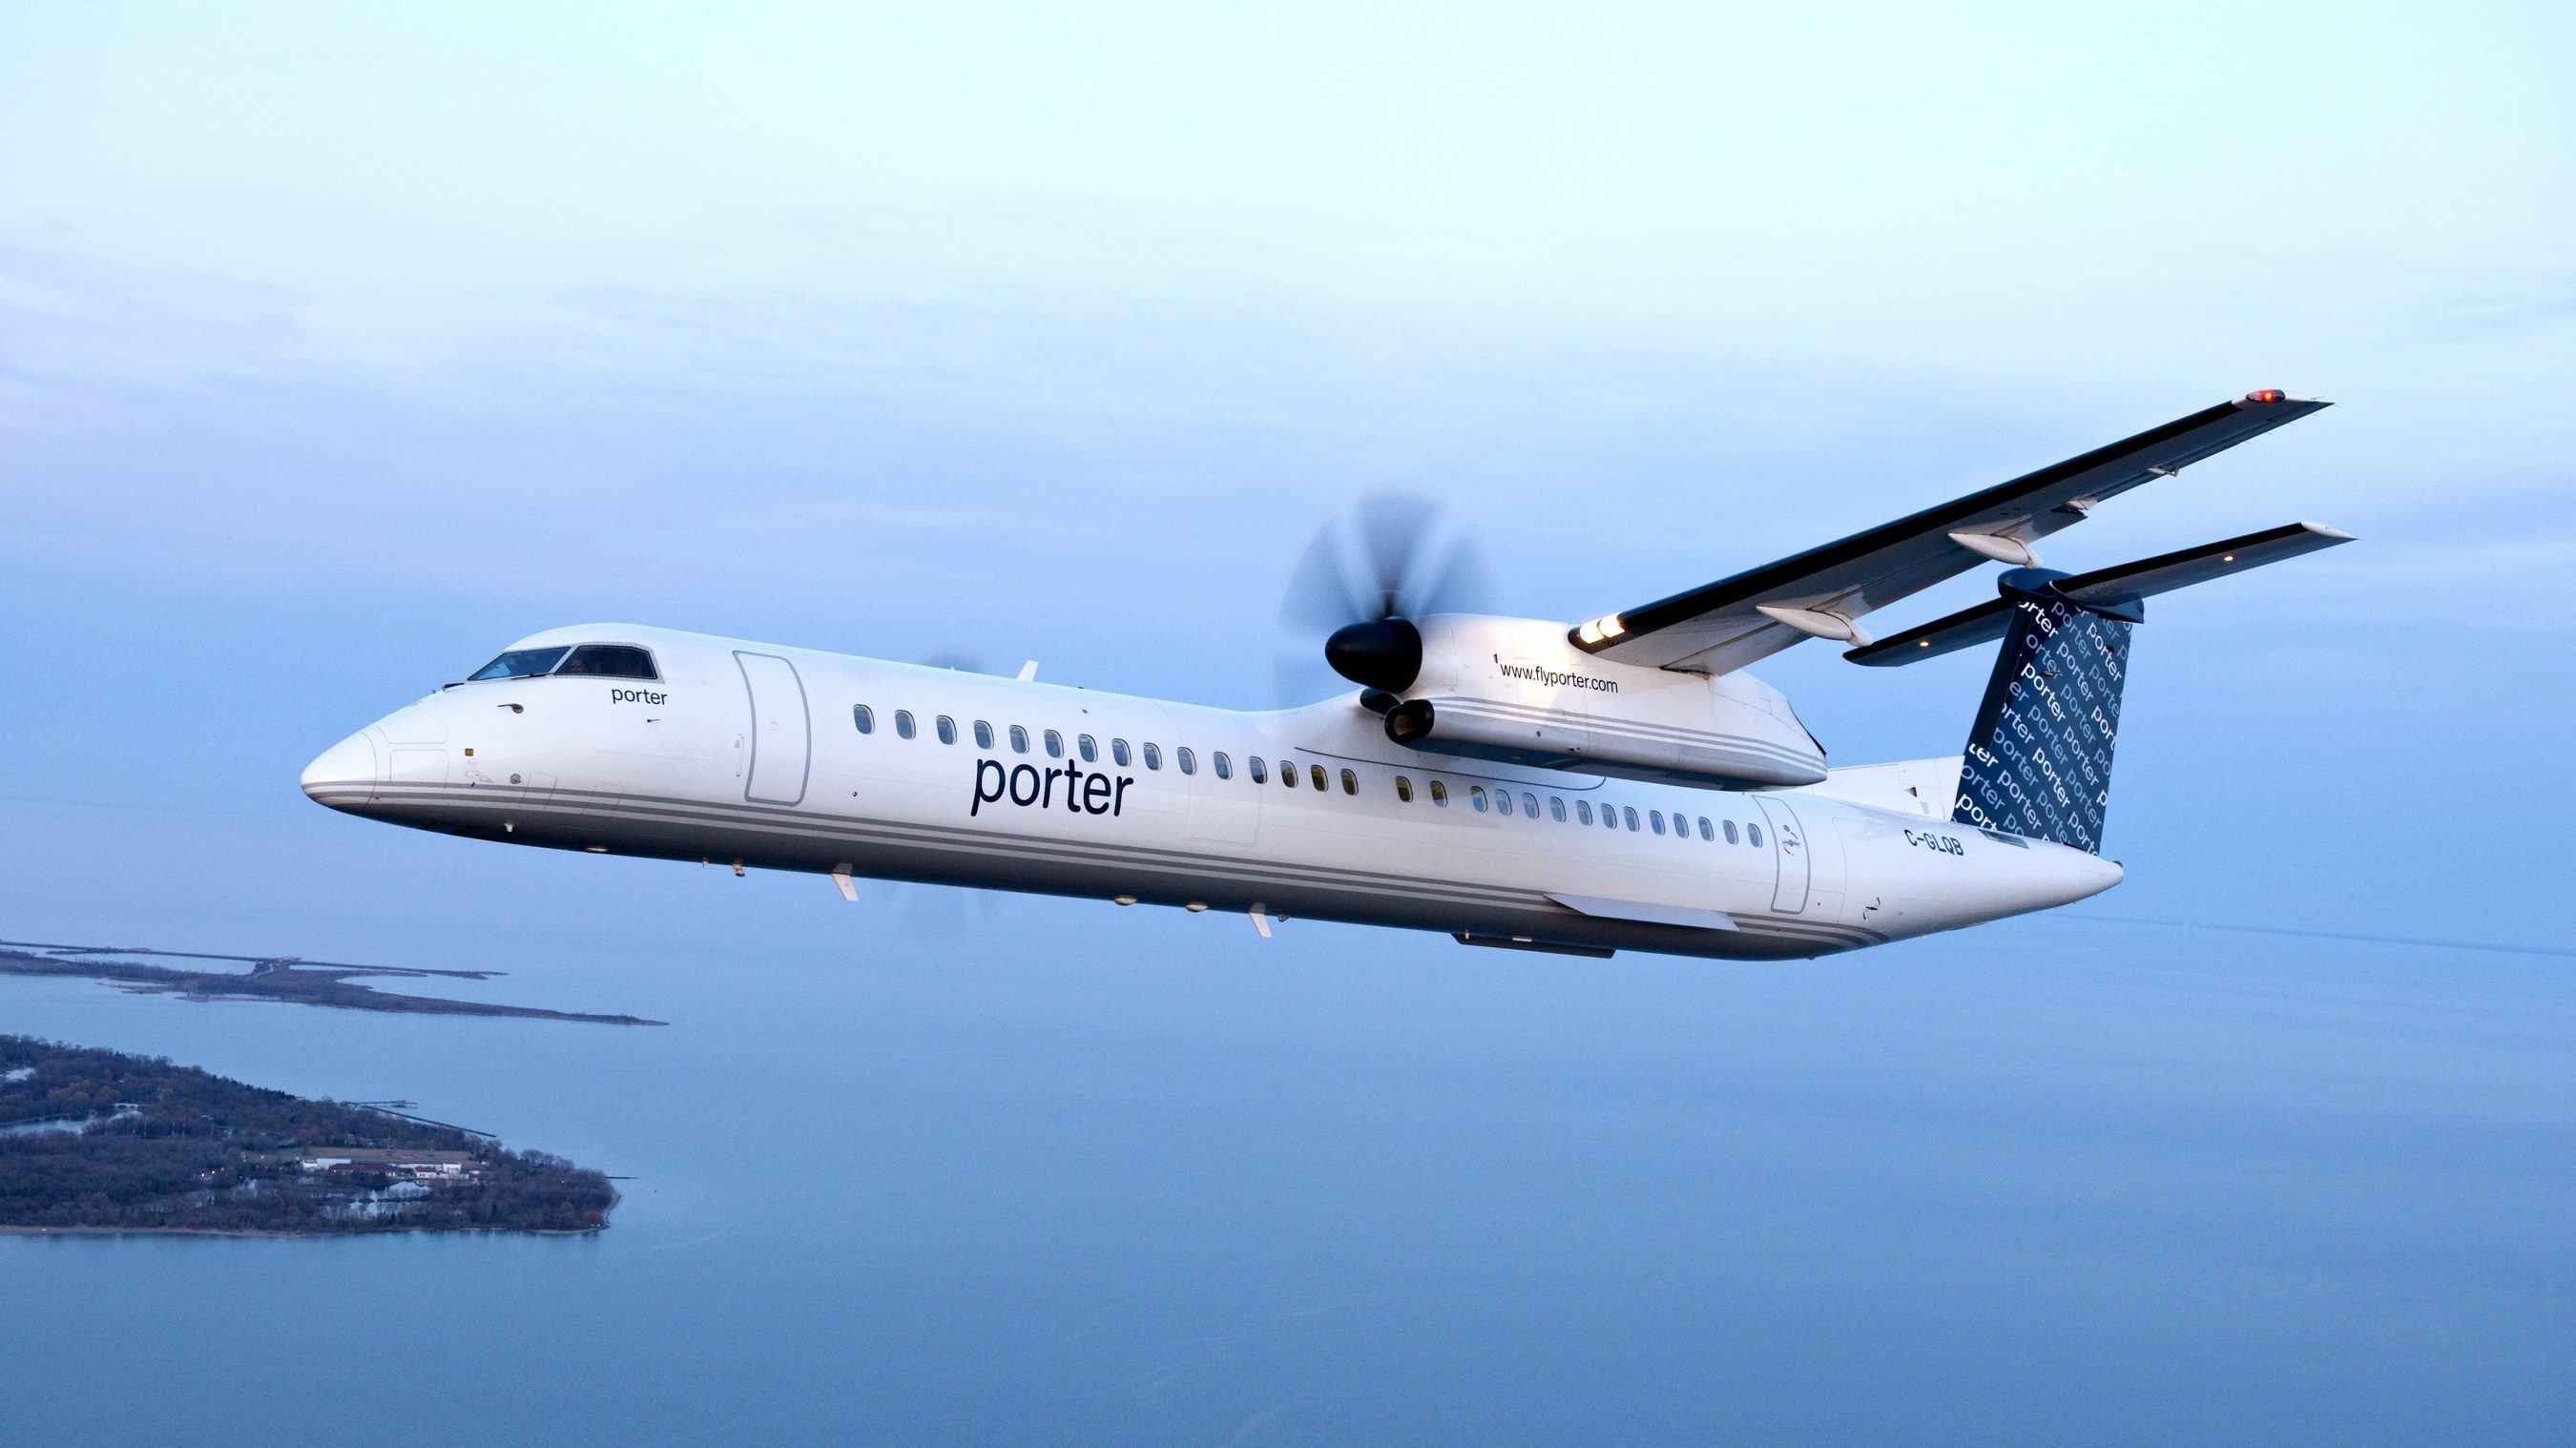 Porter Airlines began trials at their YQT and YSB maintenance bases in January of 2019, transitioned all remaining maintenance bases on July 16, and is now completely paperless. Porter Photo